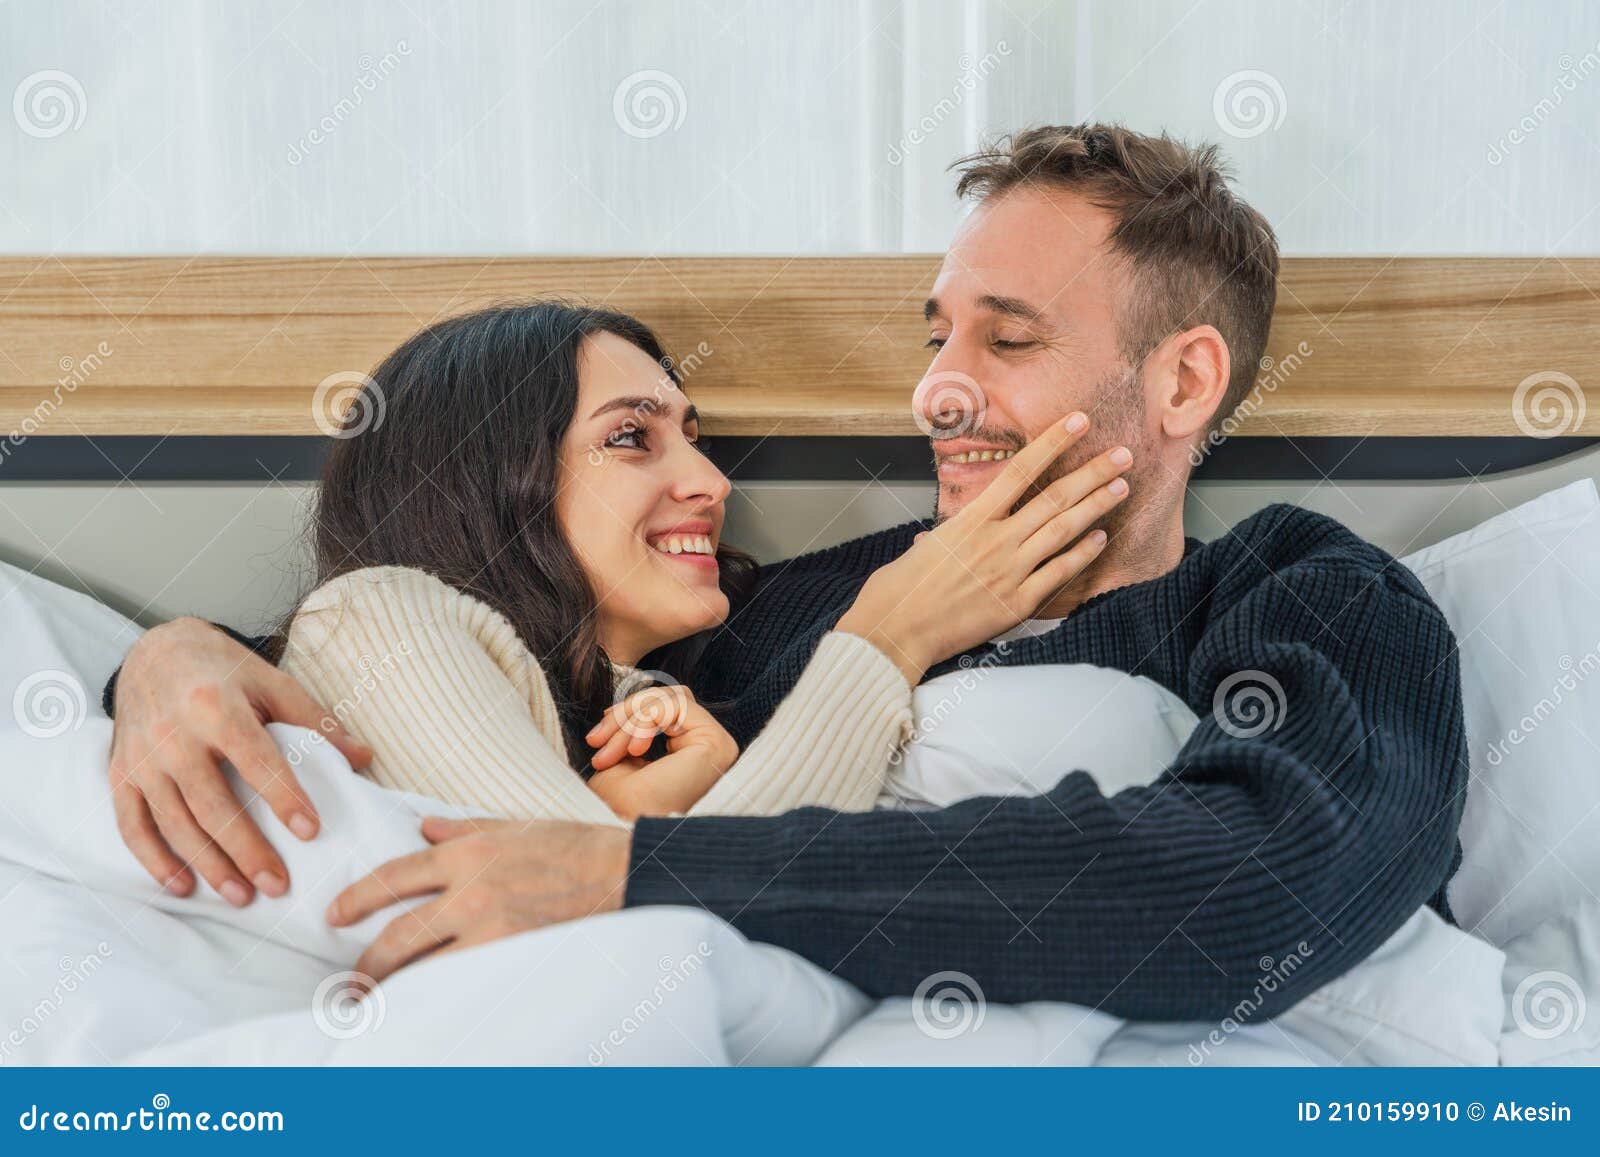 Caucasian Married Couple Husband and Wife Having Romantic Moment ...